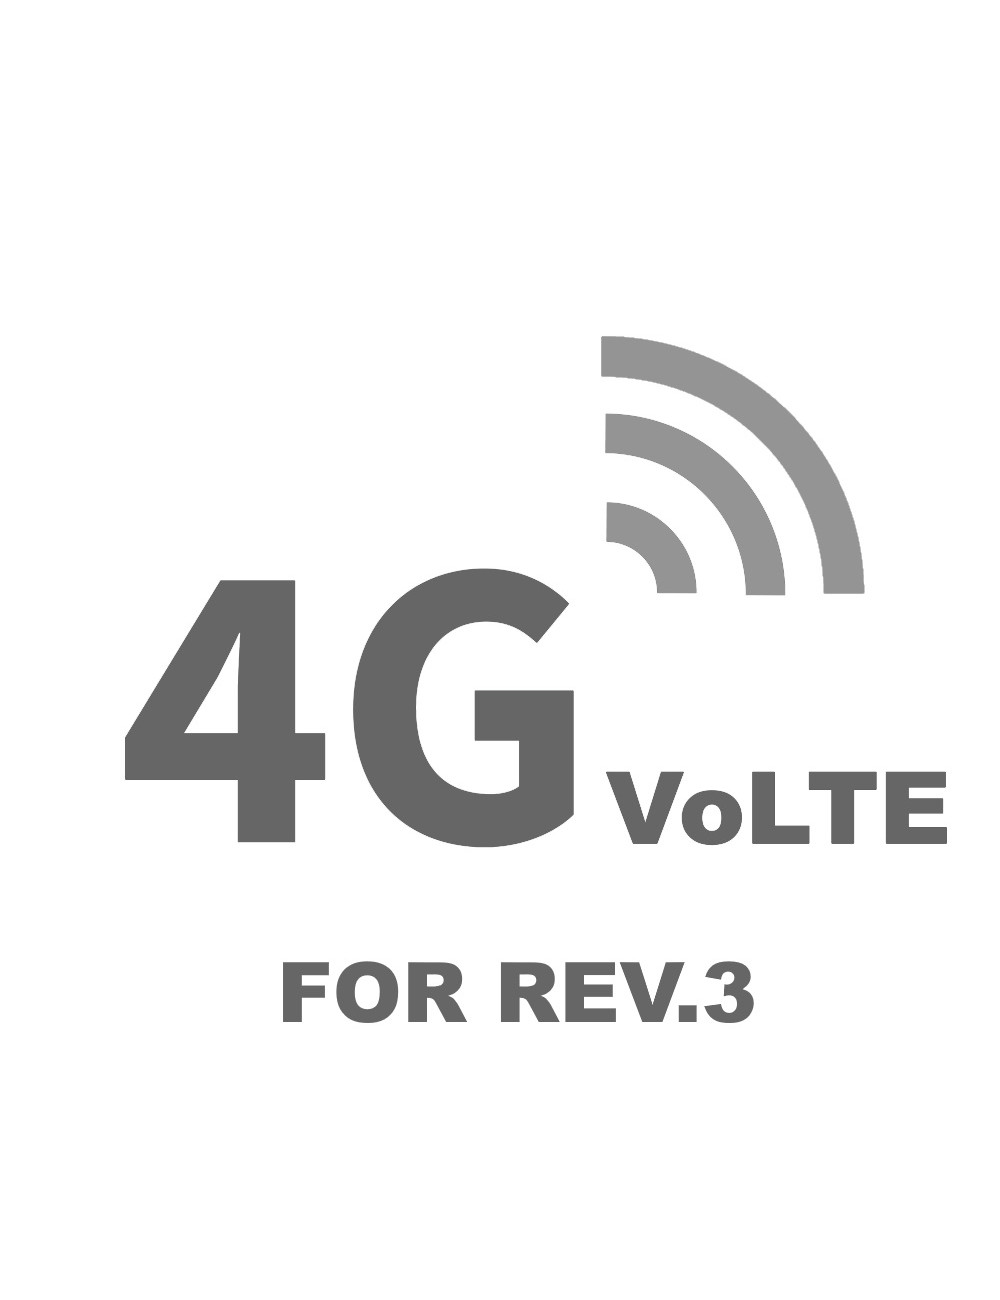 module for Rev.3 device (replacement)